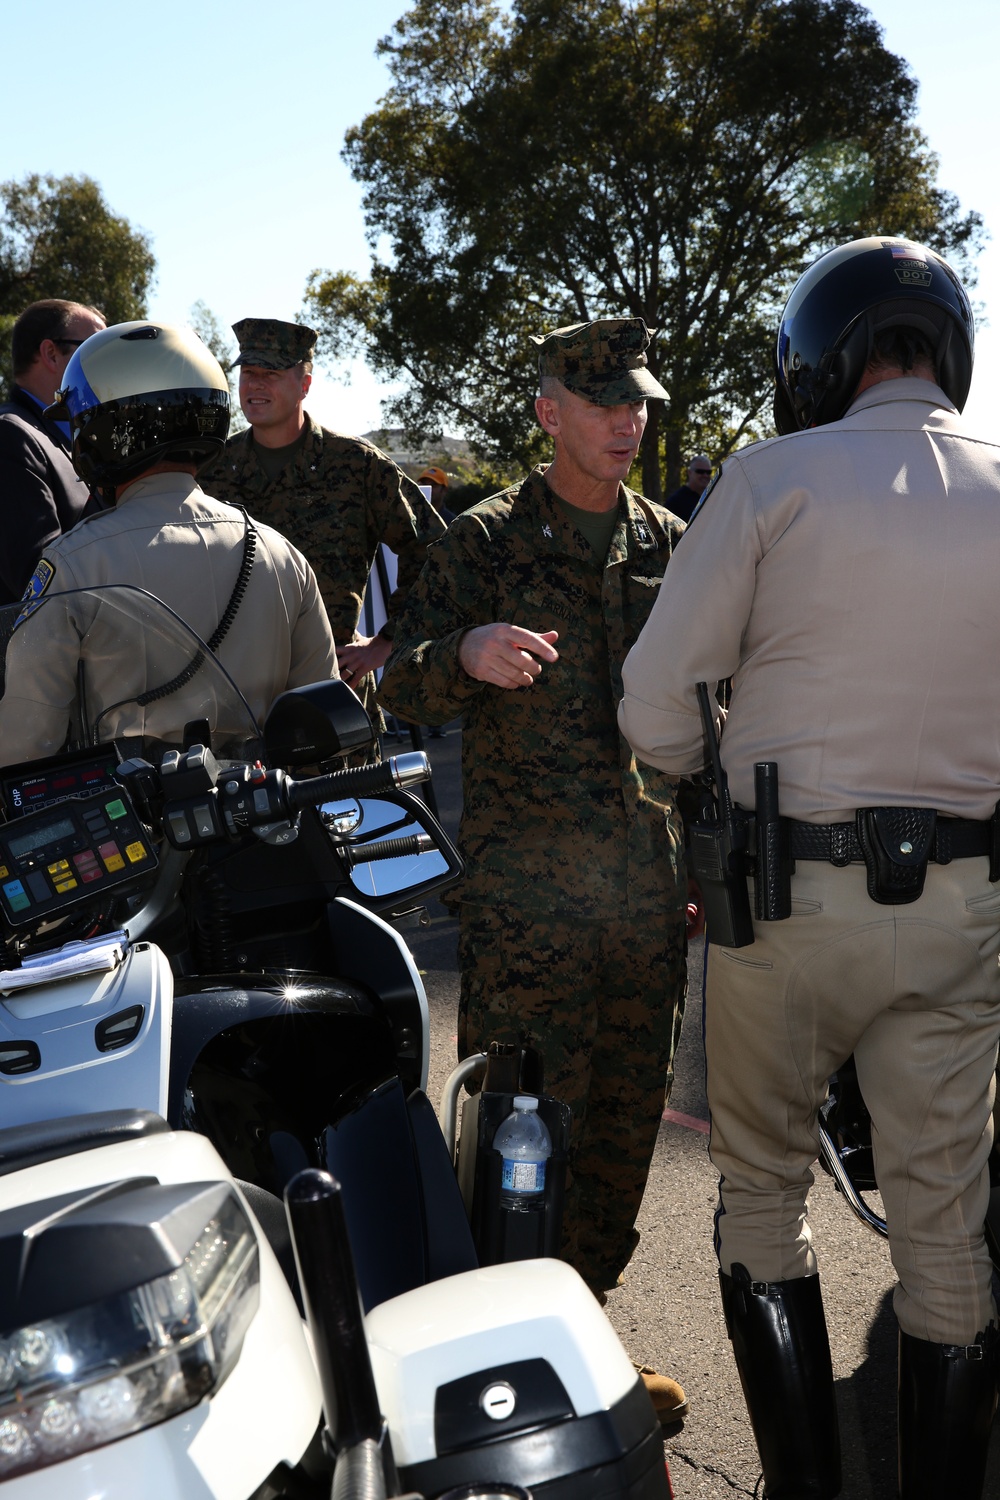 Law enforcement, Marines team up on motorcycle safety